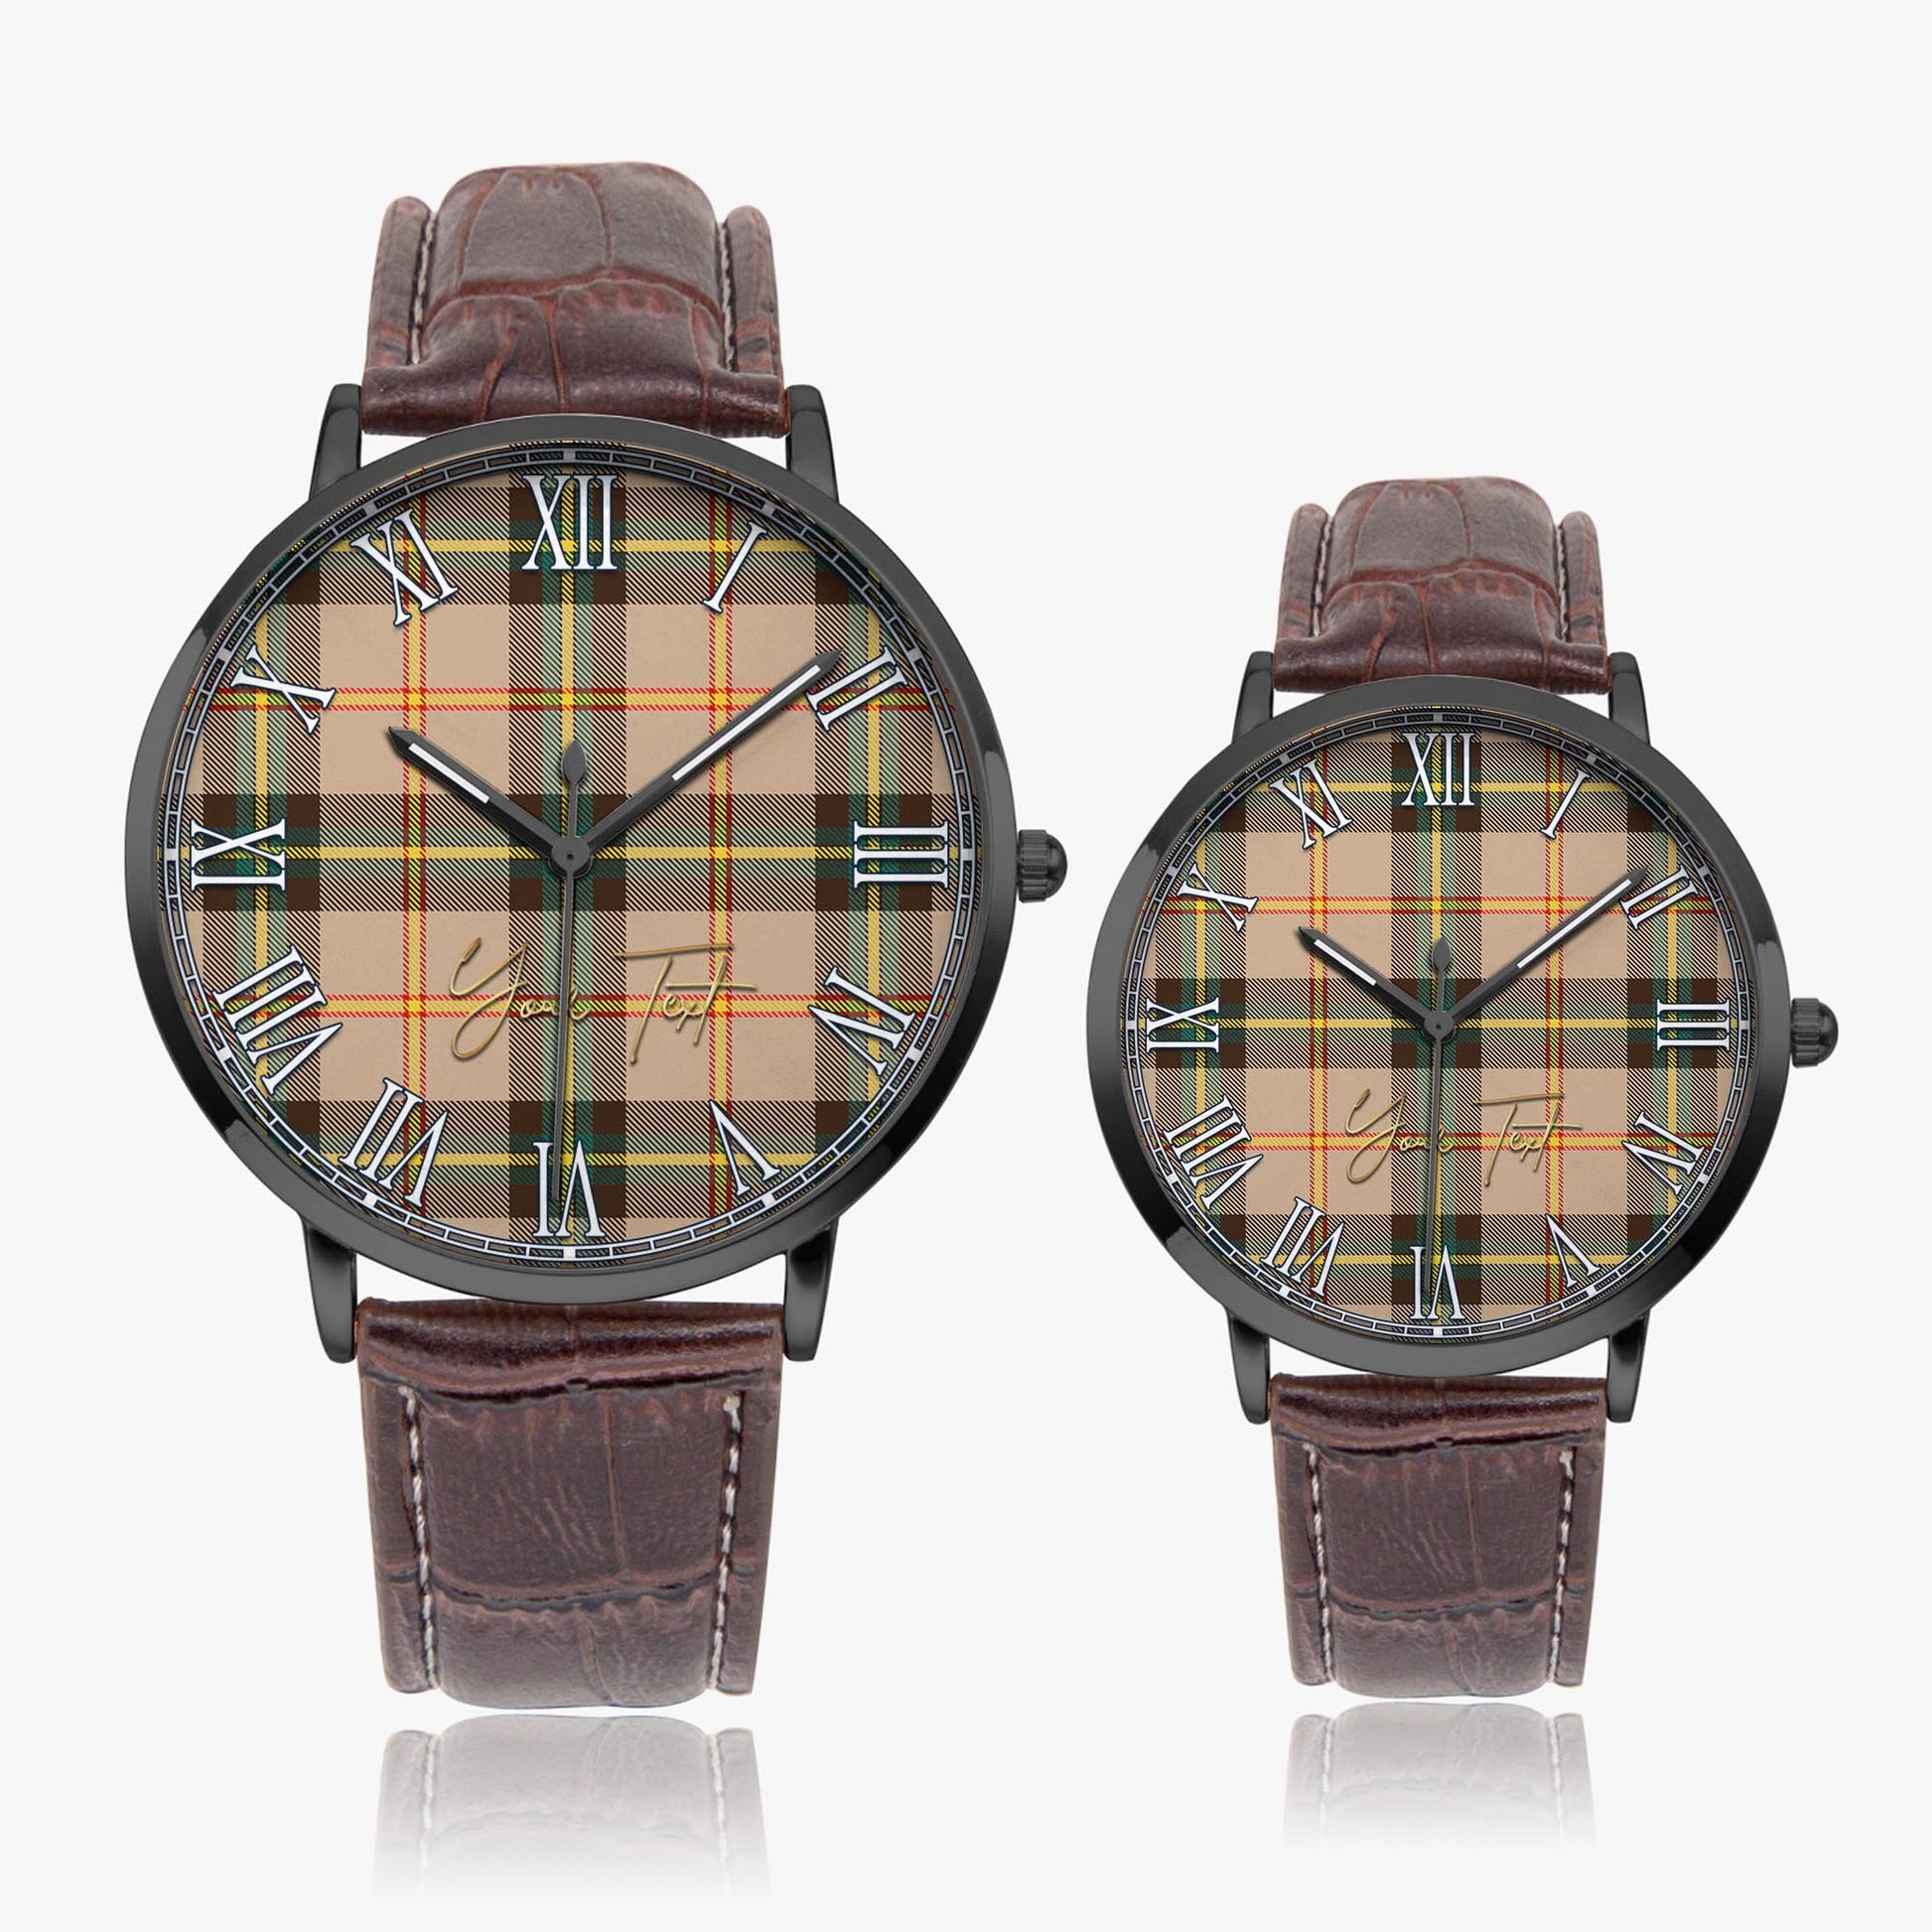 Saskatchewan Province Canada Tartan Personalized Your Text Leather Trap Quartz Watch Ultra Thin Black Case With Brown Leather Strap - Tartanvibesclothing